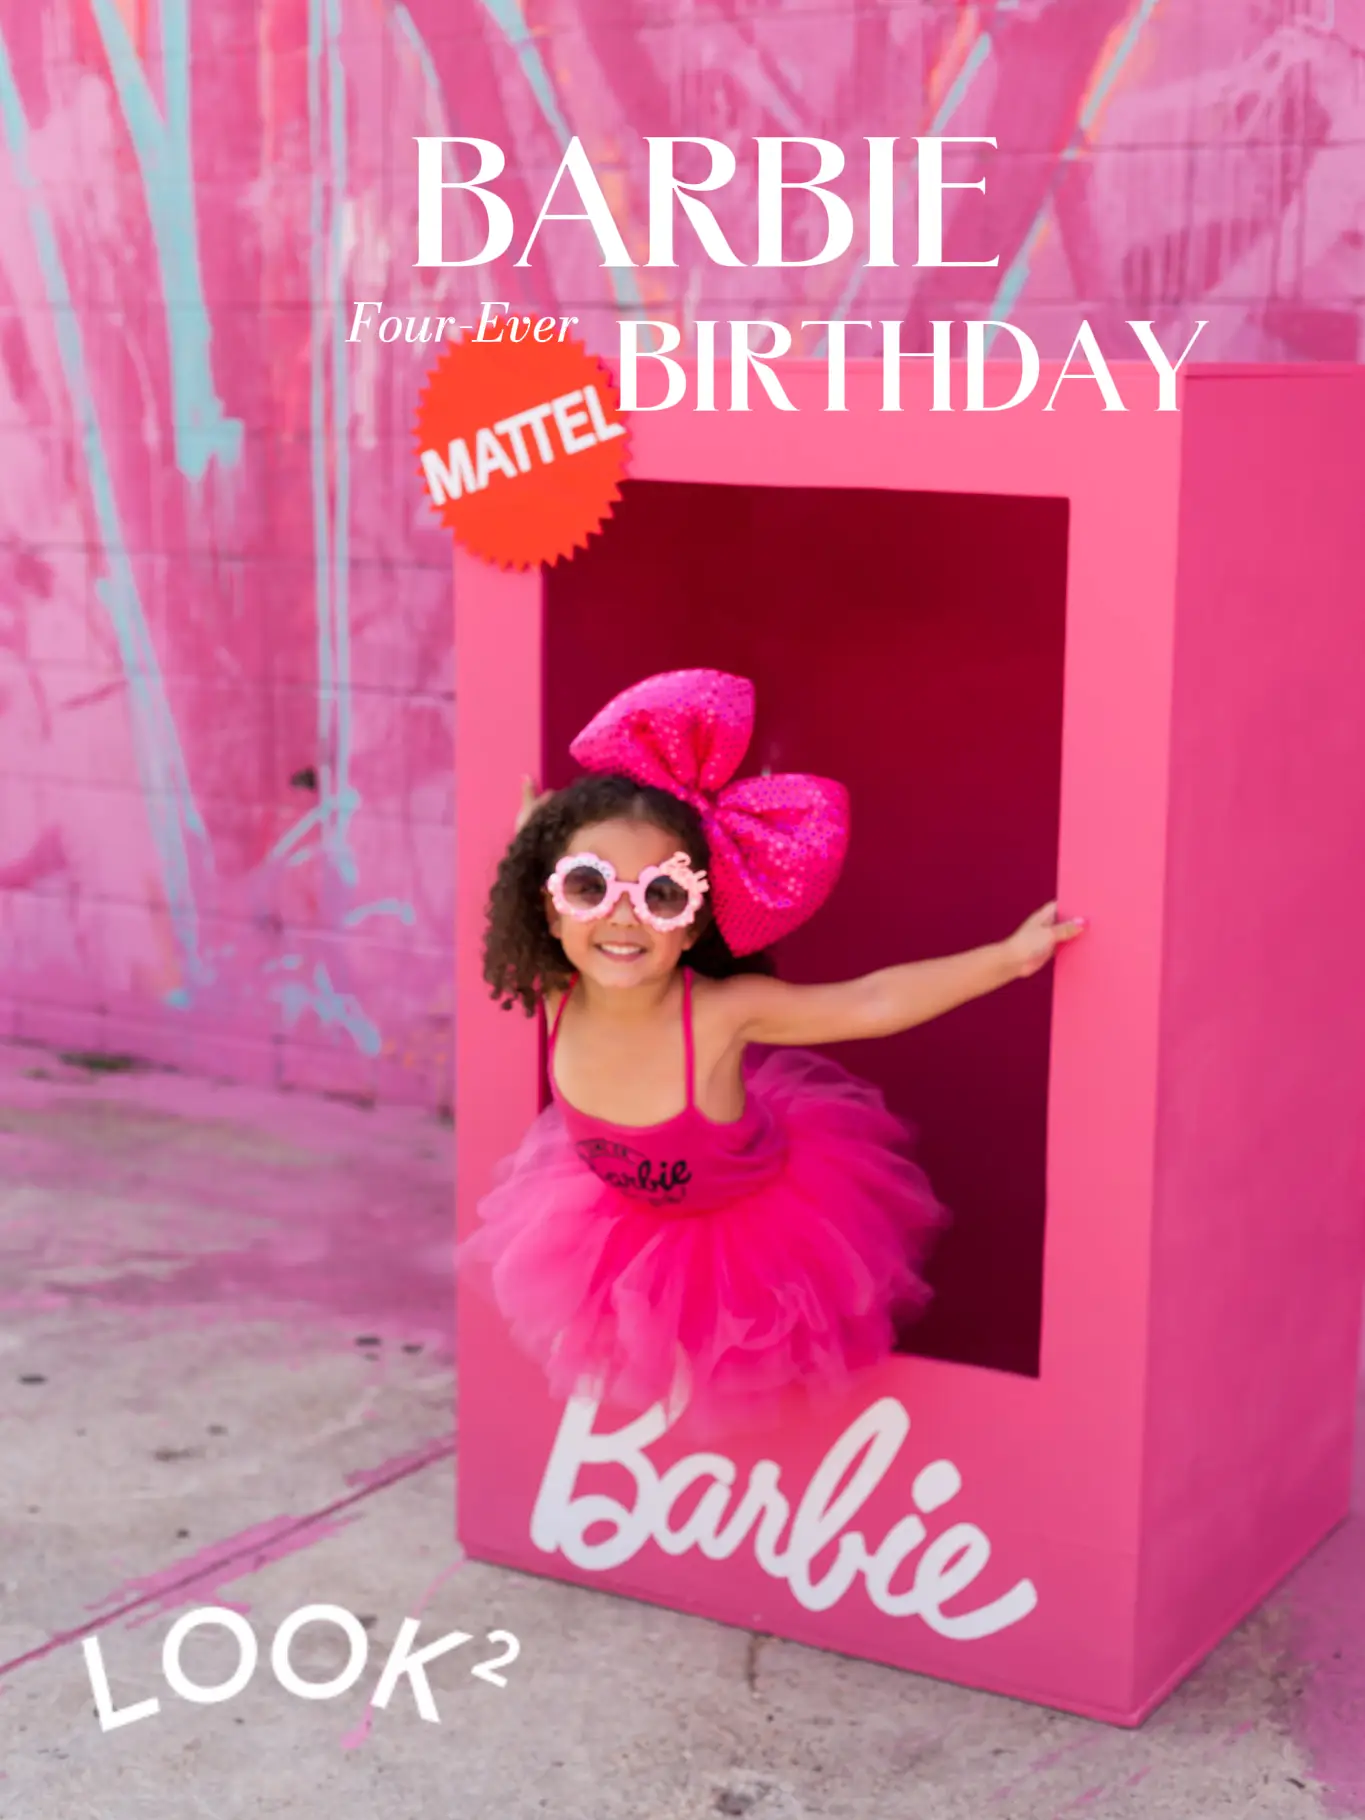 Barbie Movie Gifts That'll Have You Tickled Pink - Good Cheer